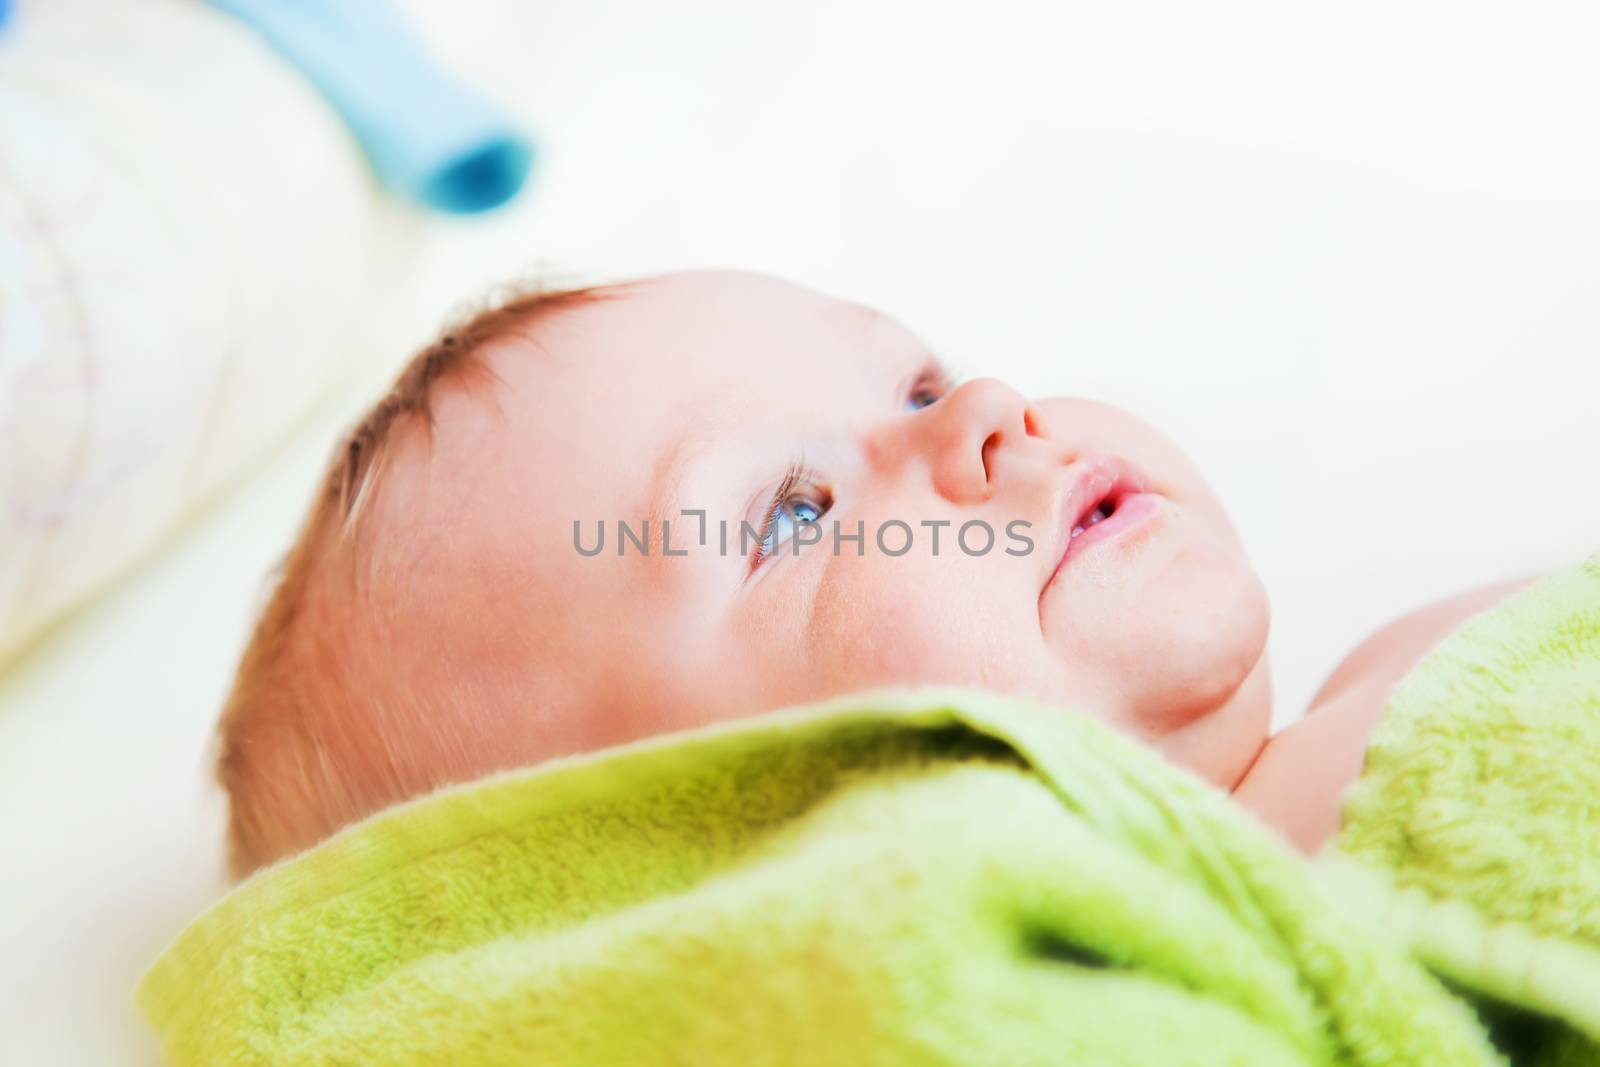 A baby waiting for changing his napkin by photocreo